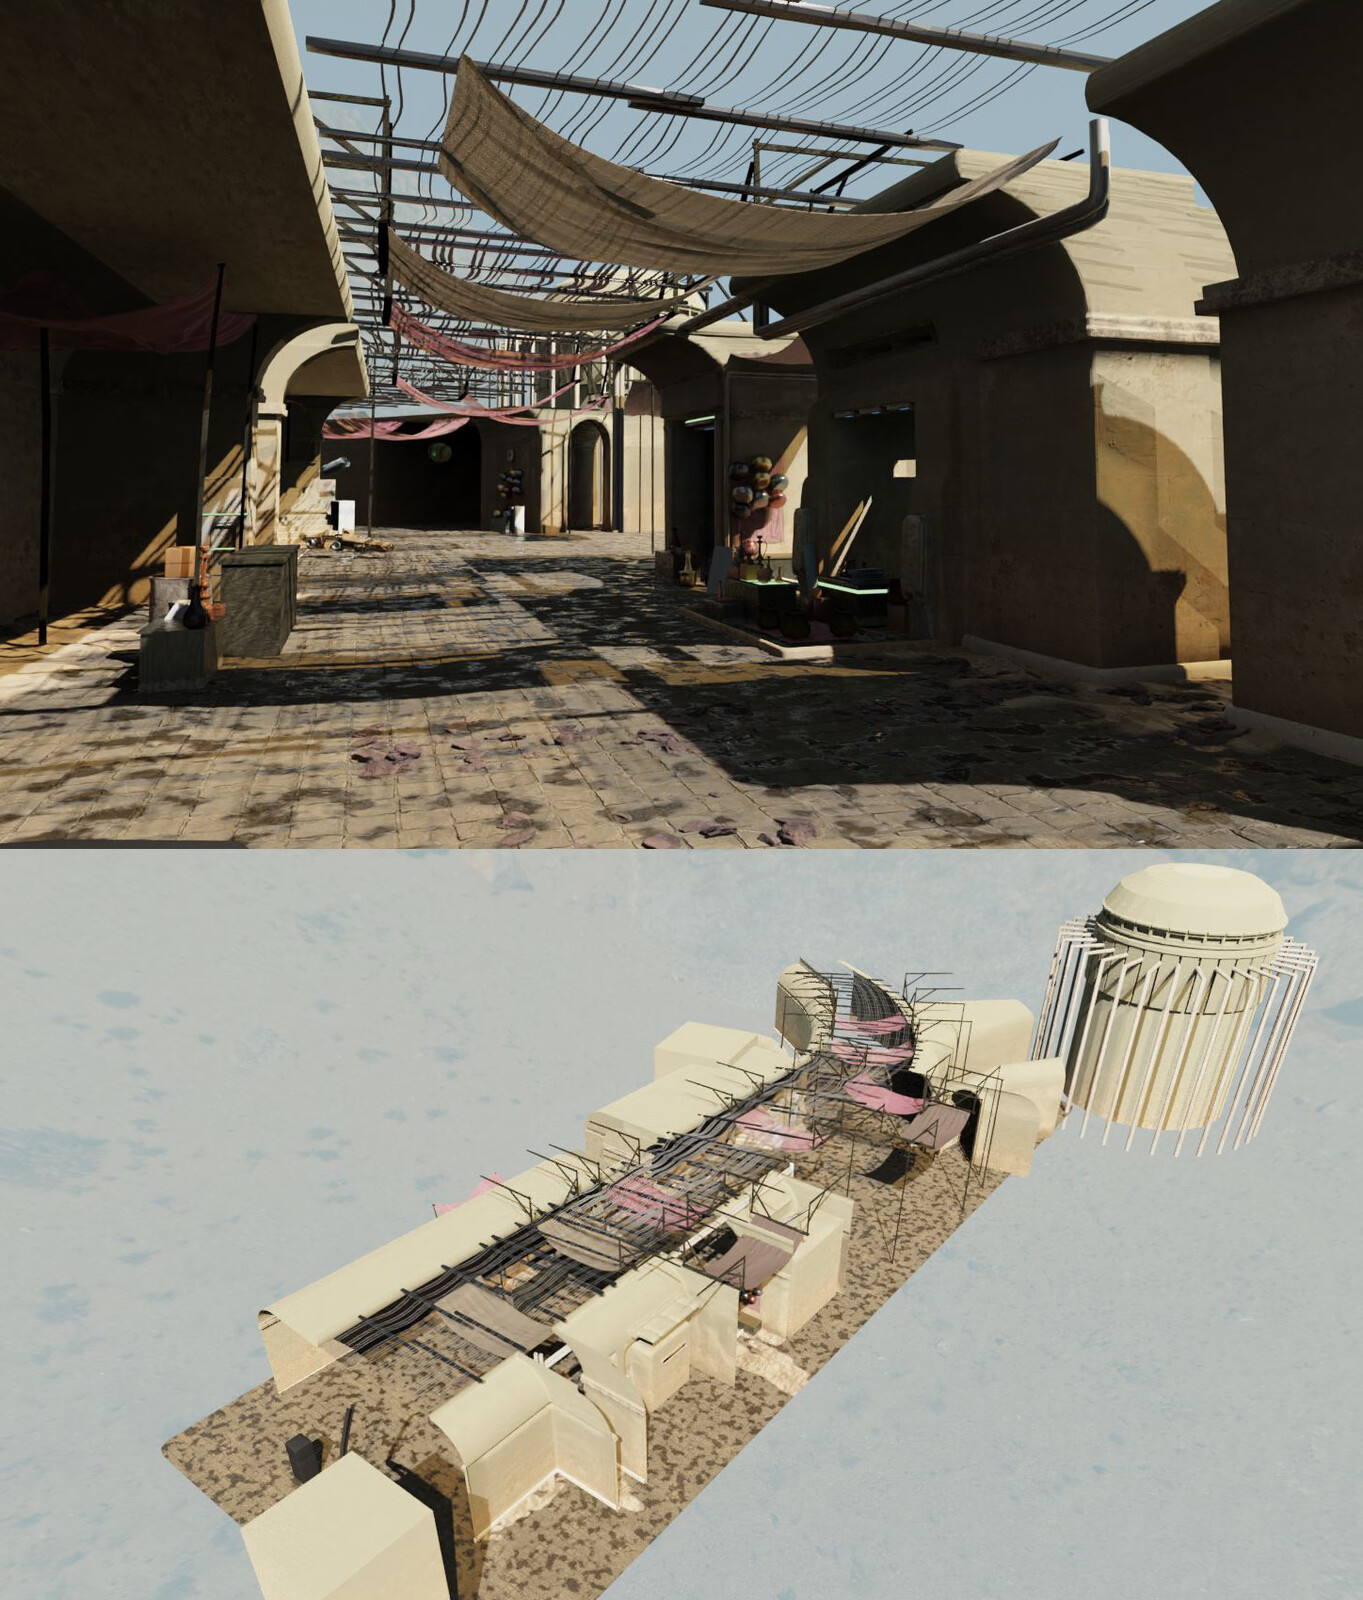 Screenshots of the environment. Most of the shaders are procedurally made within Cycles renderer